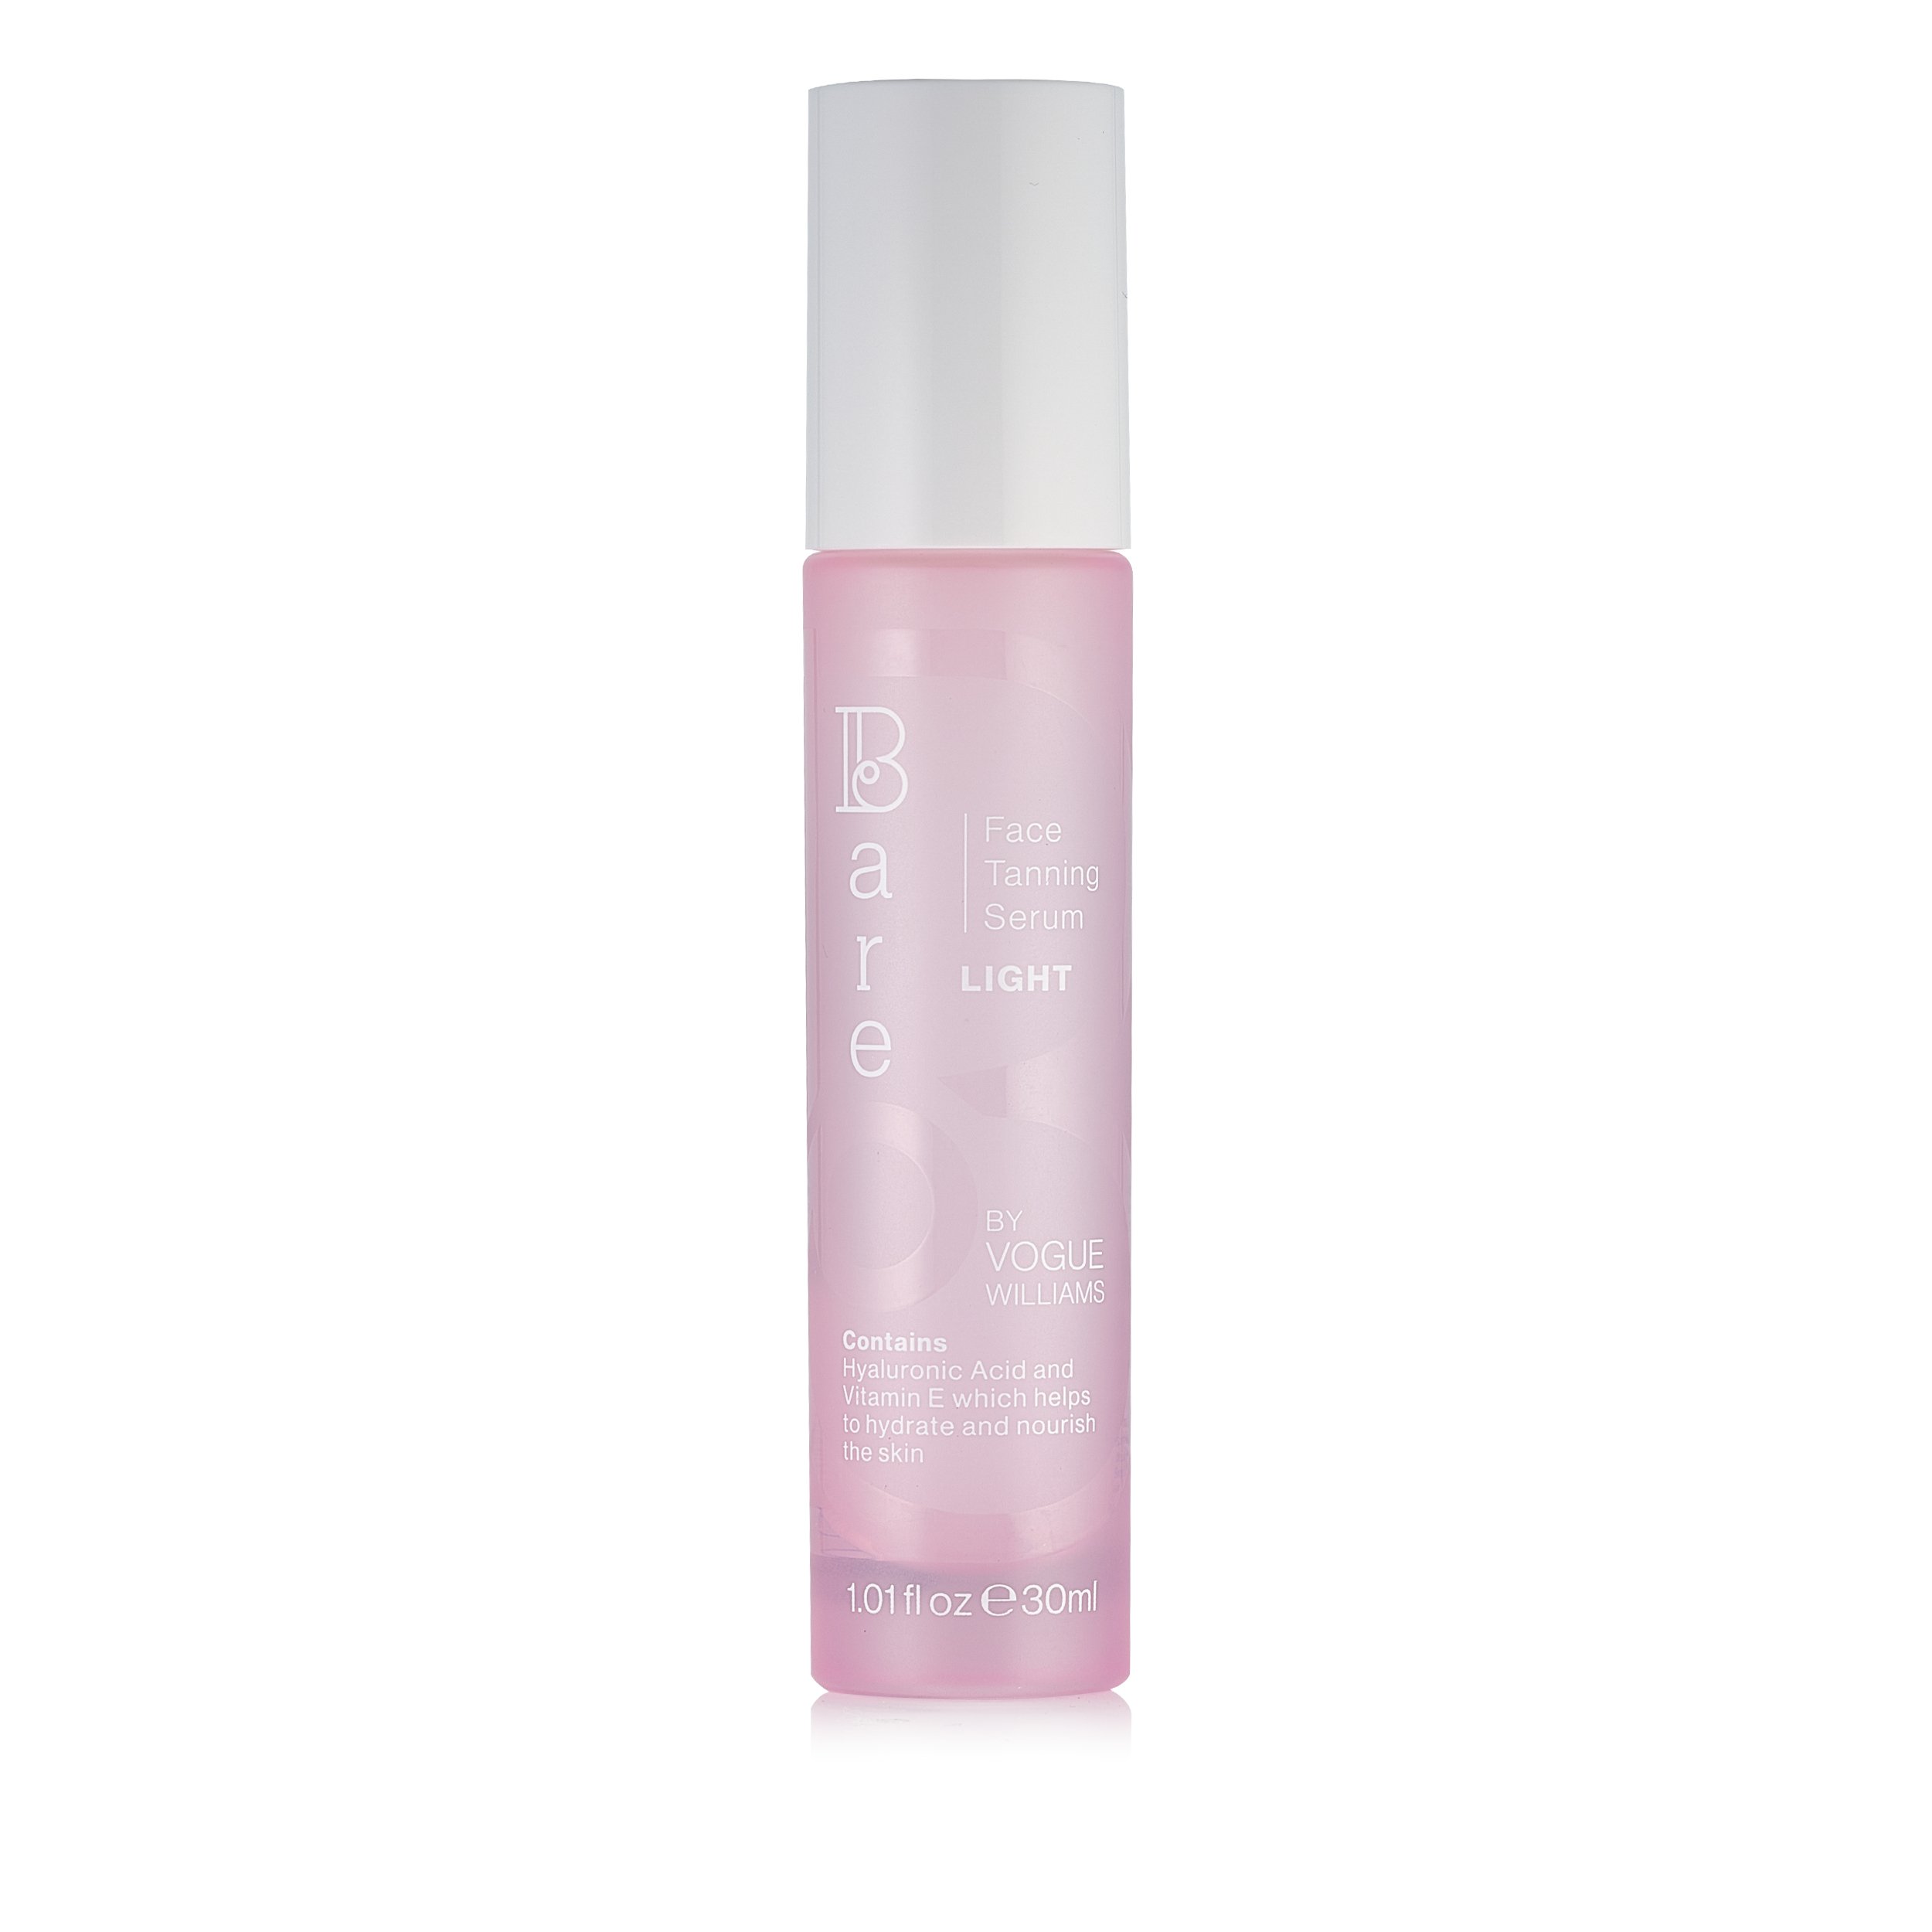 Bare by Vogue Tanning Mist €18